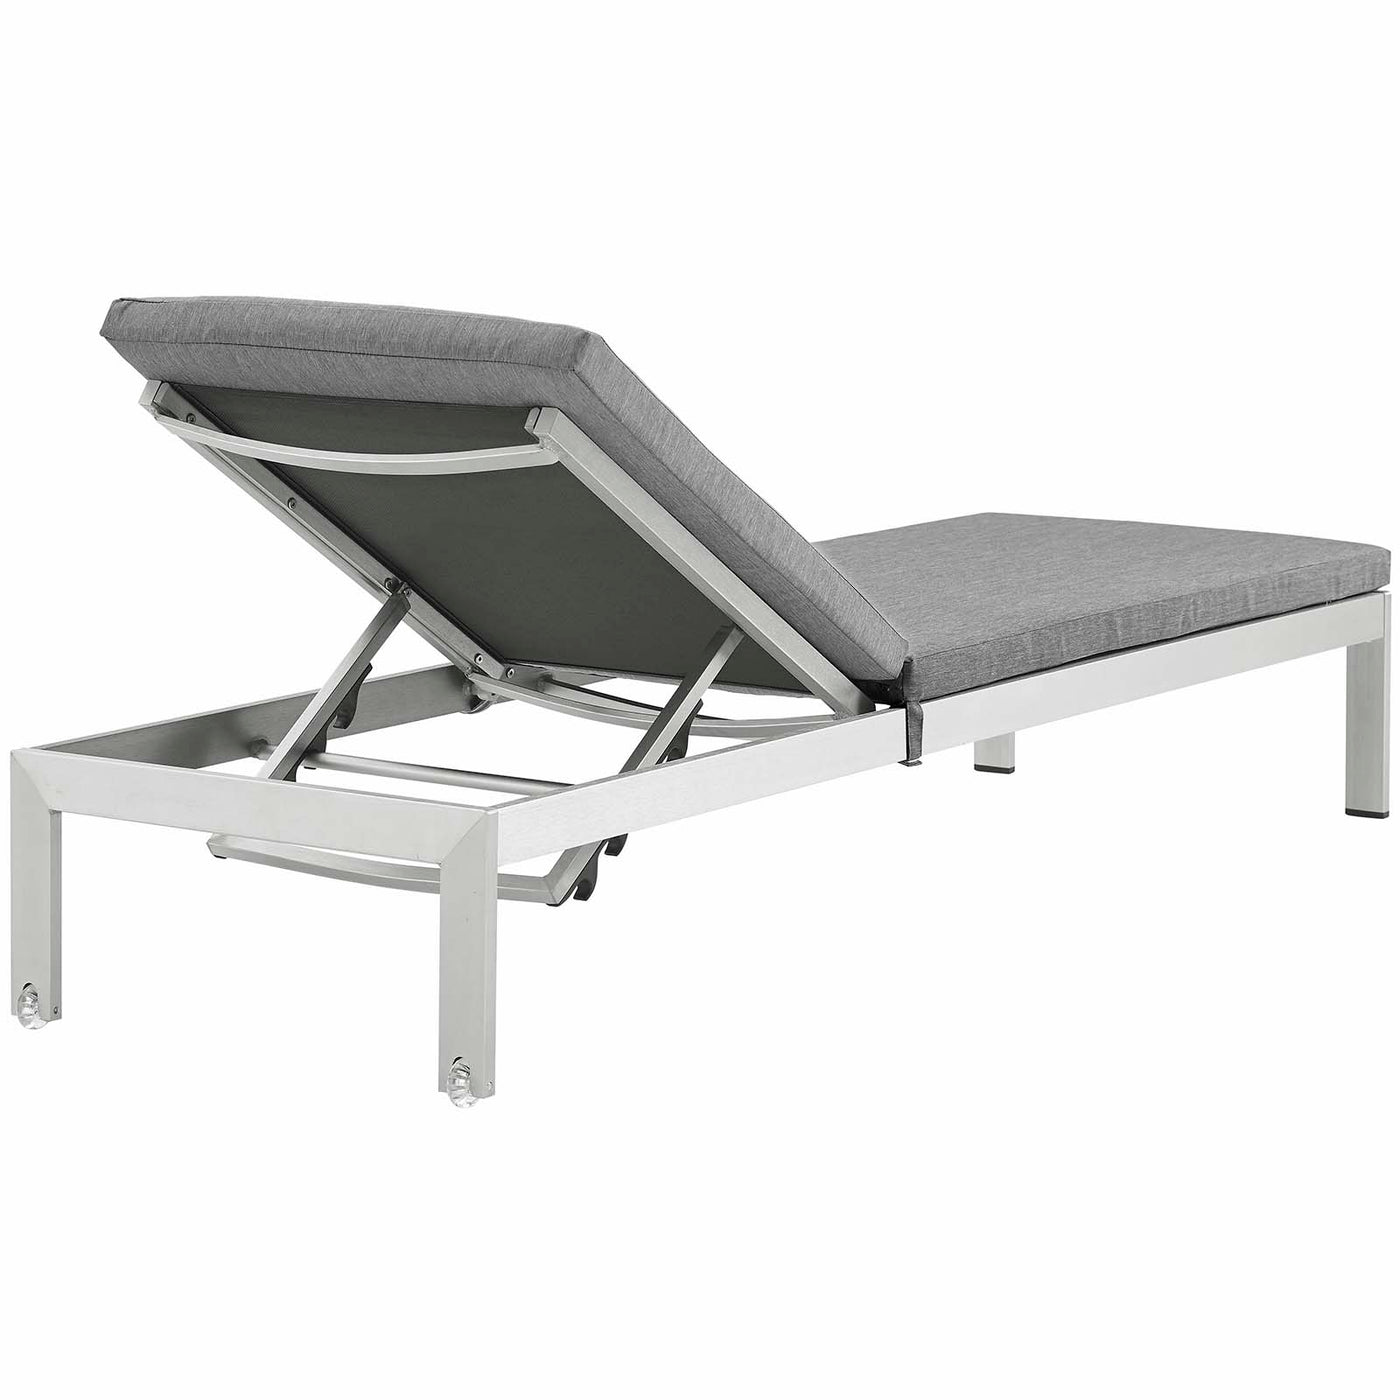 Shore 3 Piece Outdoor Patio Aluminum Chaise with Cushions